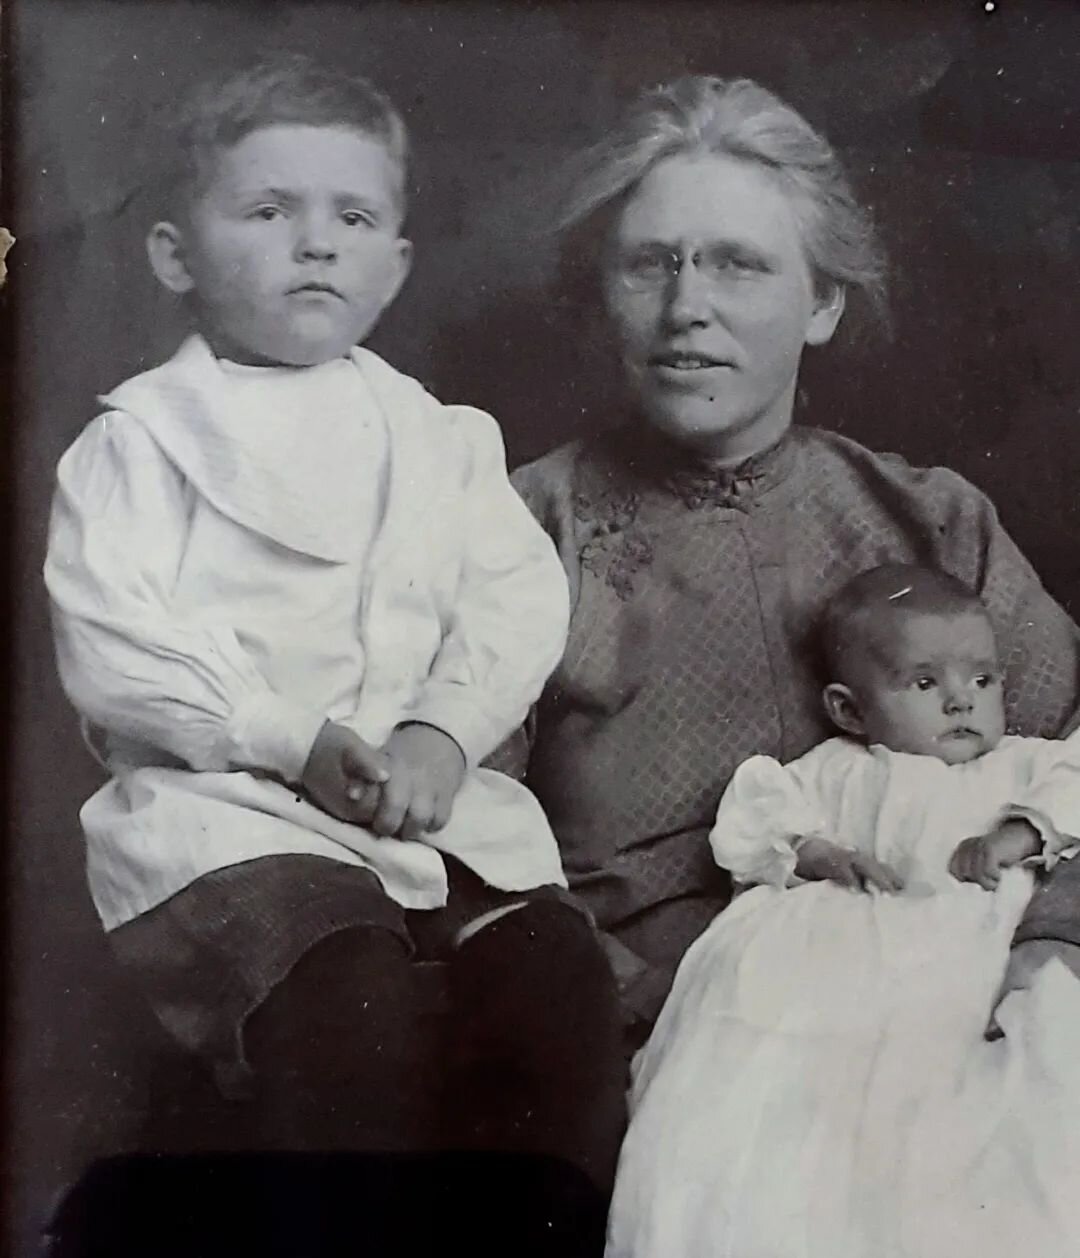 This is my American great-grandmother Charlotte. One hundred and twenty years ago she was a doctor, living and working in China, travelling around (with three small children) administering medical care to rural communities in Shaanxi. She spoke manda